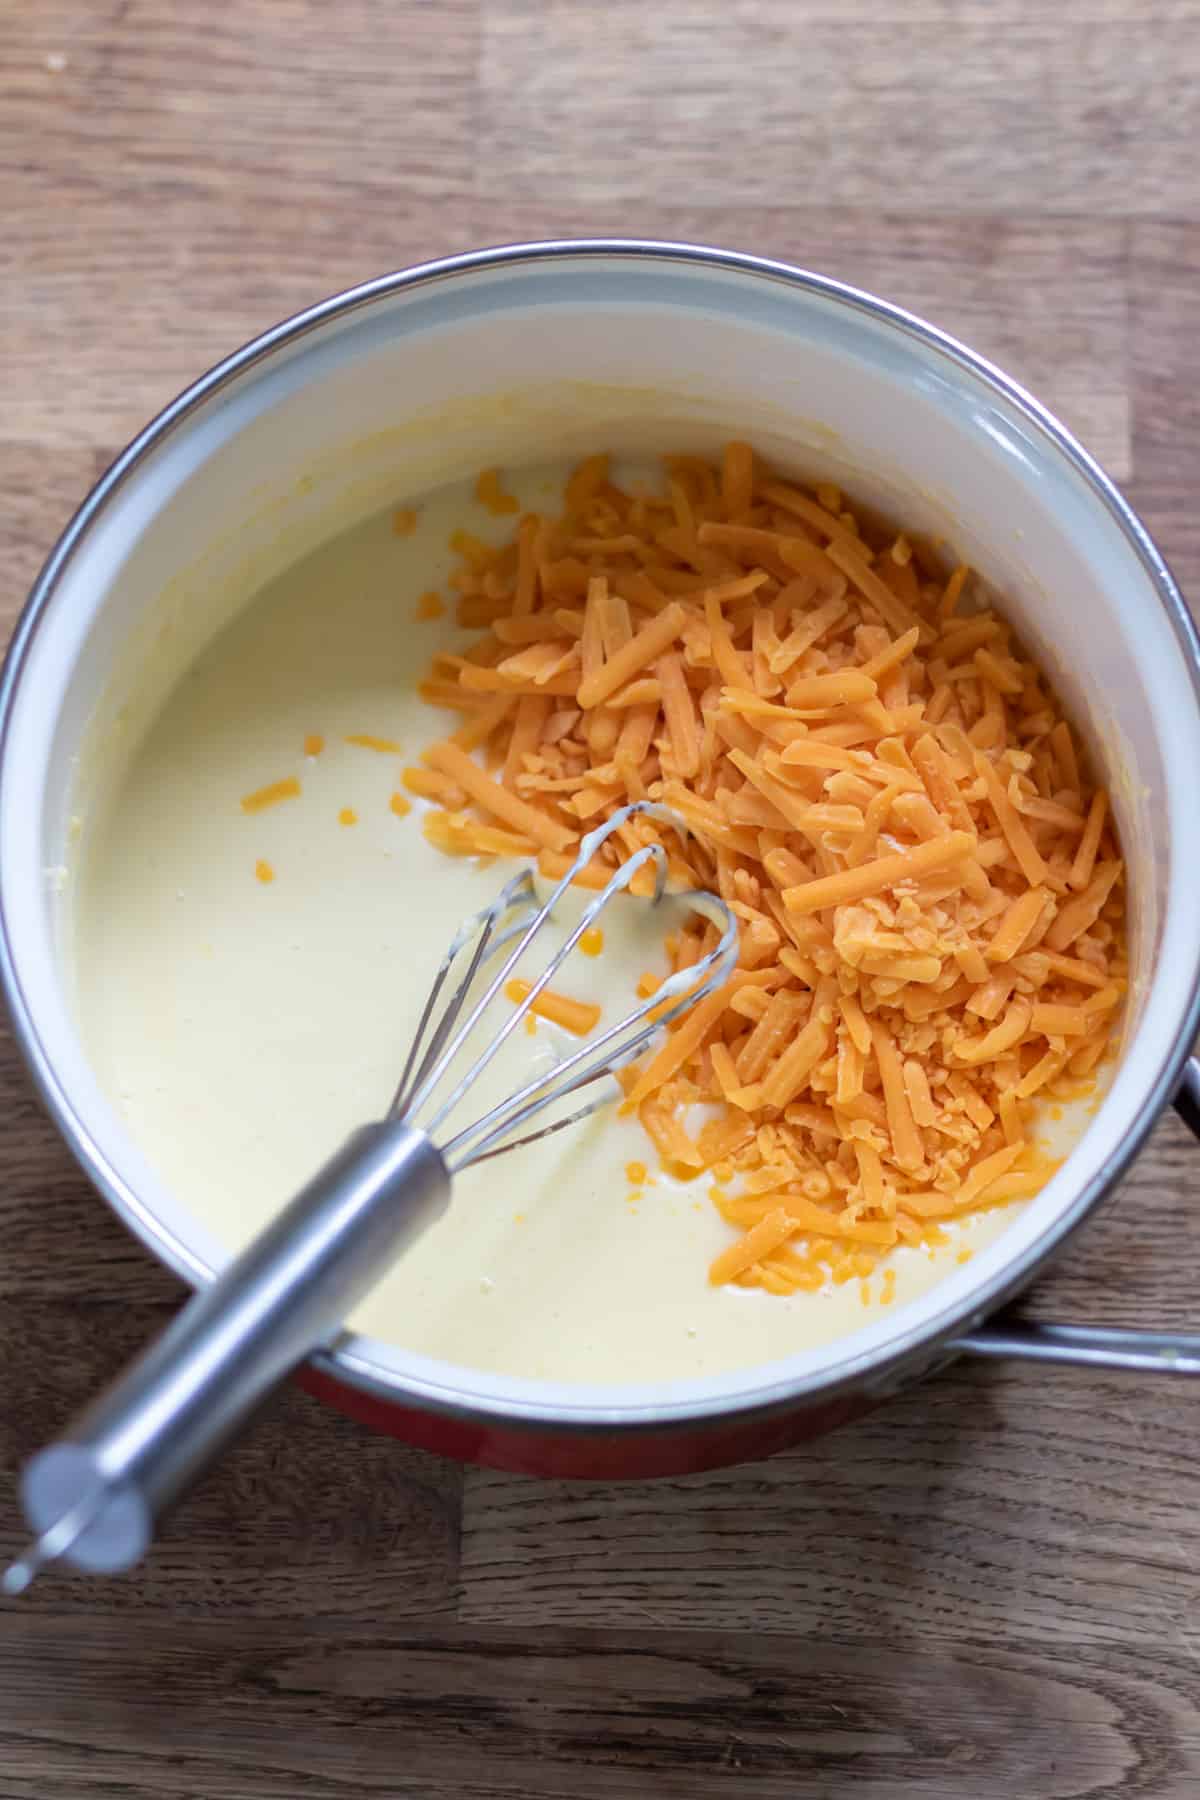 Shredded cheese added to the pot.